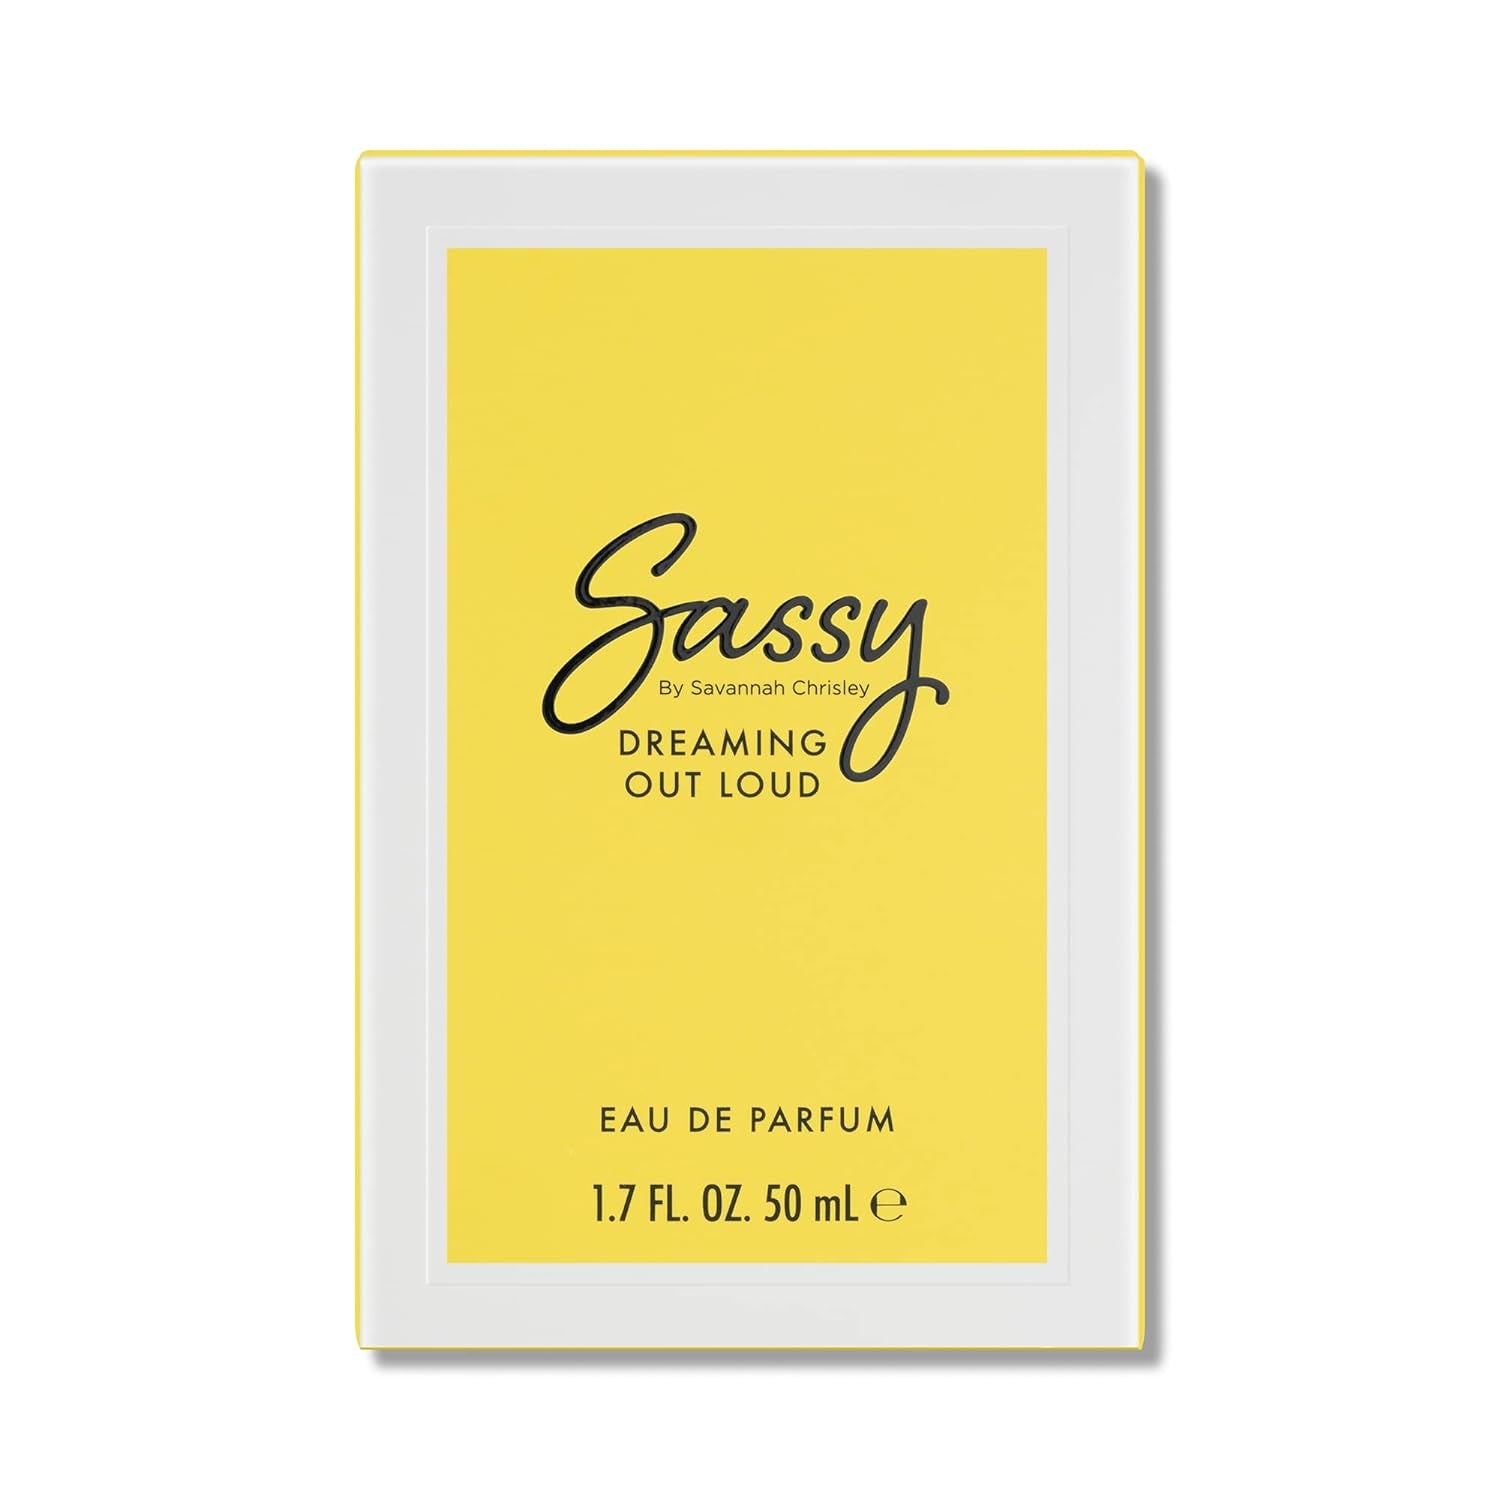 Dreaming Out Loud from Sassy by Savannah Chrisley - Perfume for Women - Floral Fragrance - Opens with Notes of Wild Berries, Bergamot, and Lemon - for Ladies with High Aspirations - 1.7 oz EDP Spray